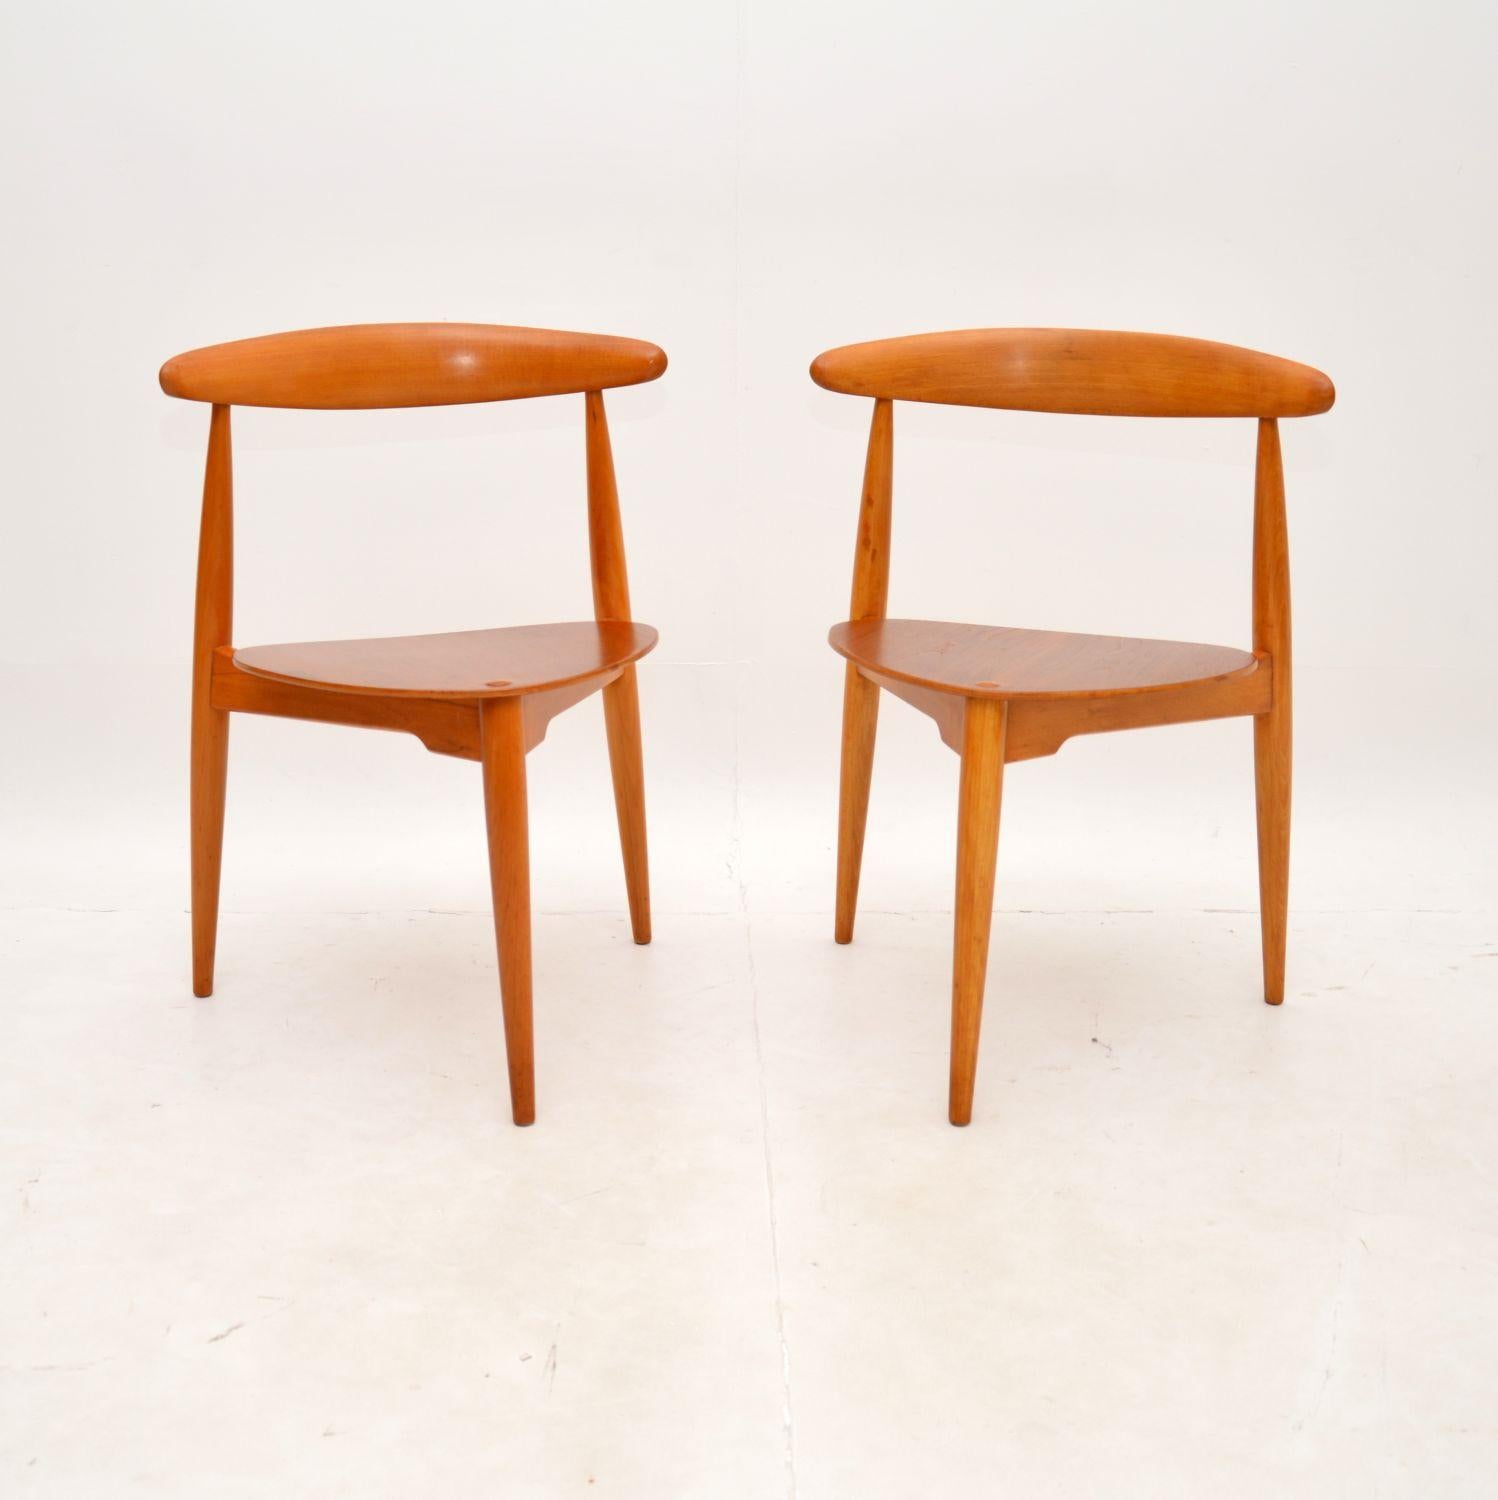 A stunning and extremely well made pair of Danish vintage teak heart chairs by Hans Wegner. They were made in Denmark by Fritz Hansen, they date from the 1950’s.

The quality is outstanding, they stand on three tapered legs, they are remarkably